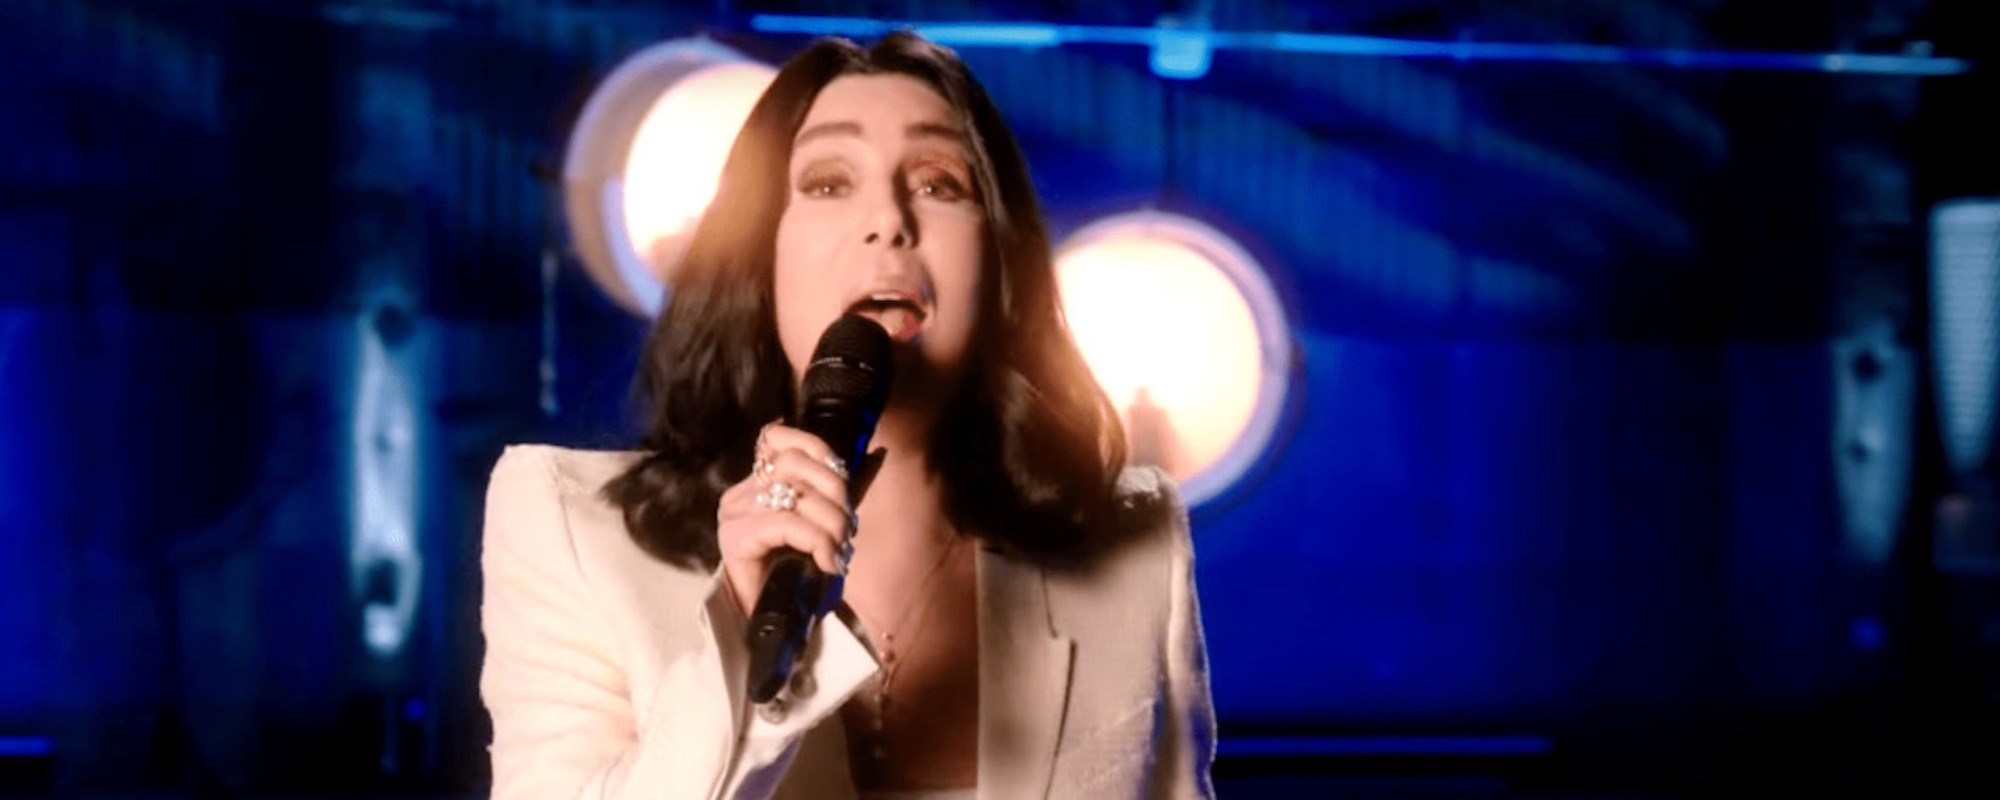 Cher Sings ‘Golden Girls’ Theme Song, Honoring the Late Betty White on TV Tribute